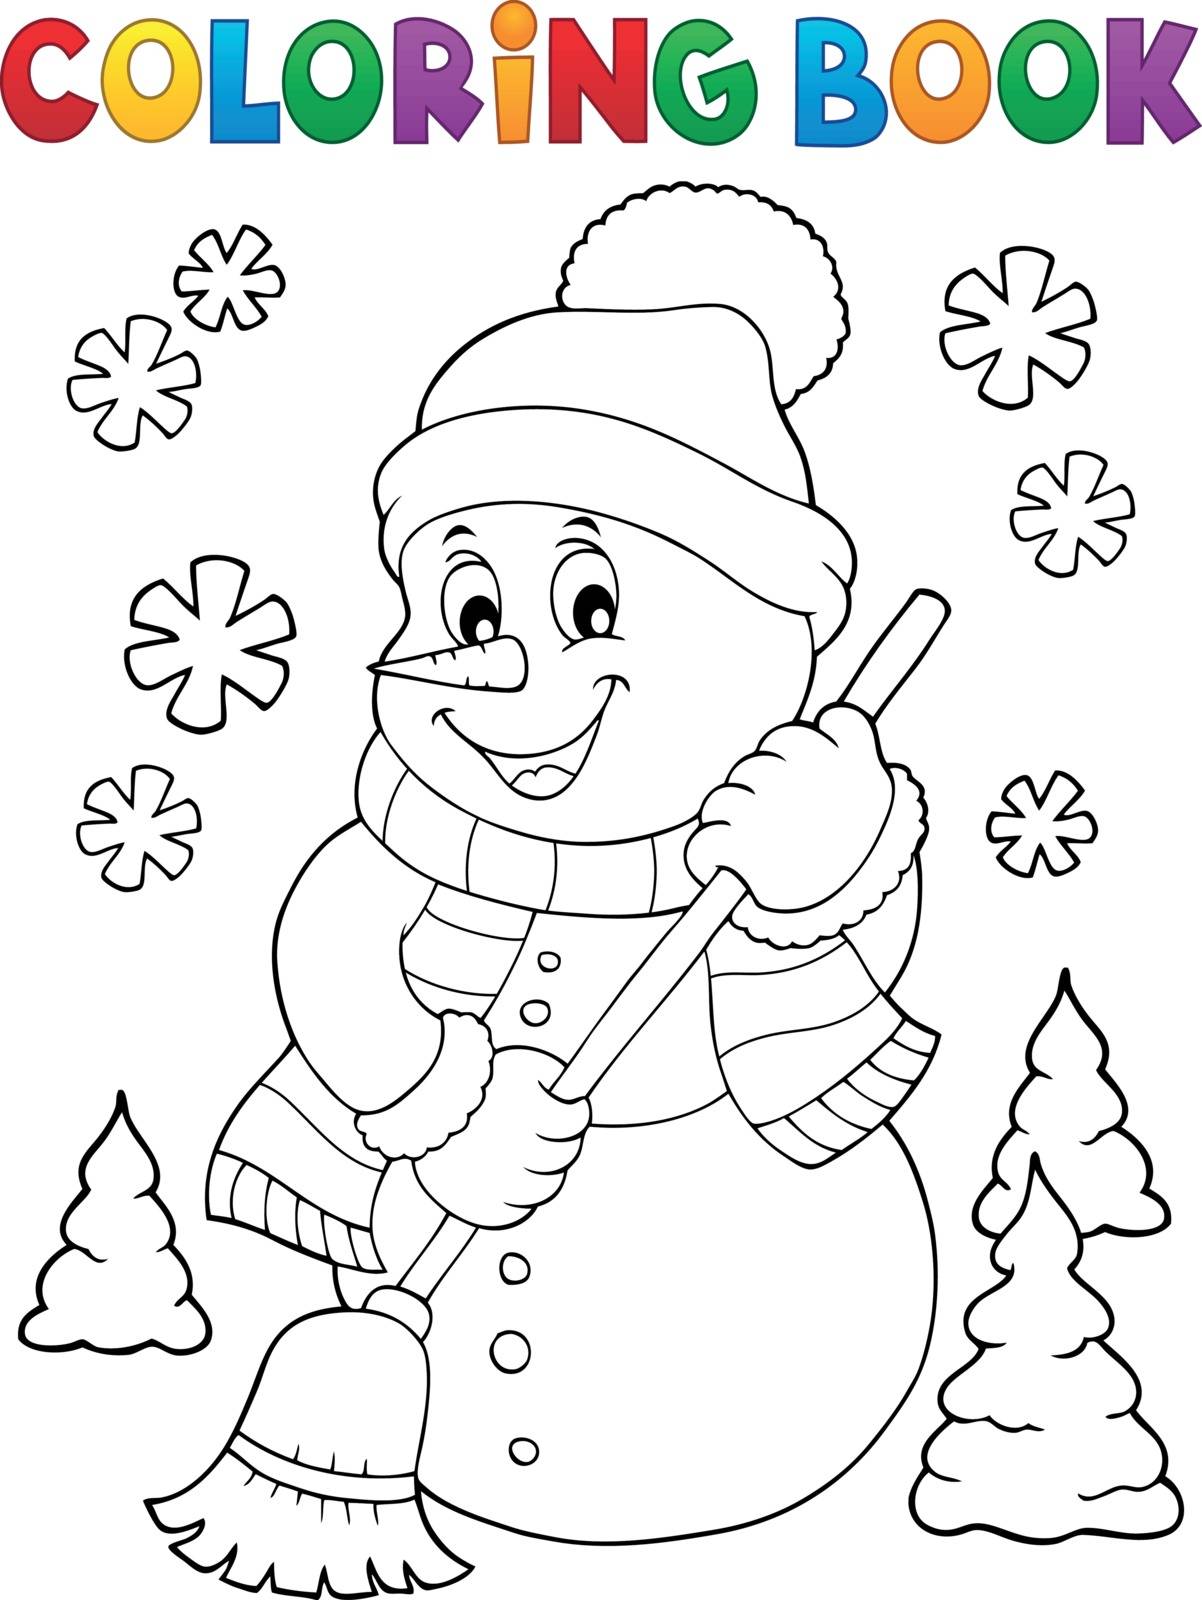 Coloring book snowman topic 5 - eps10 vector illustration.